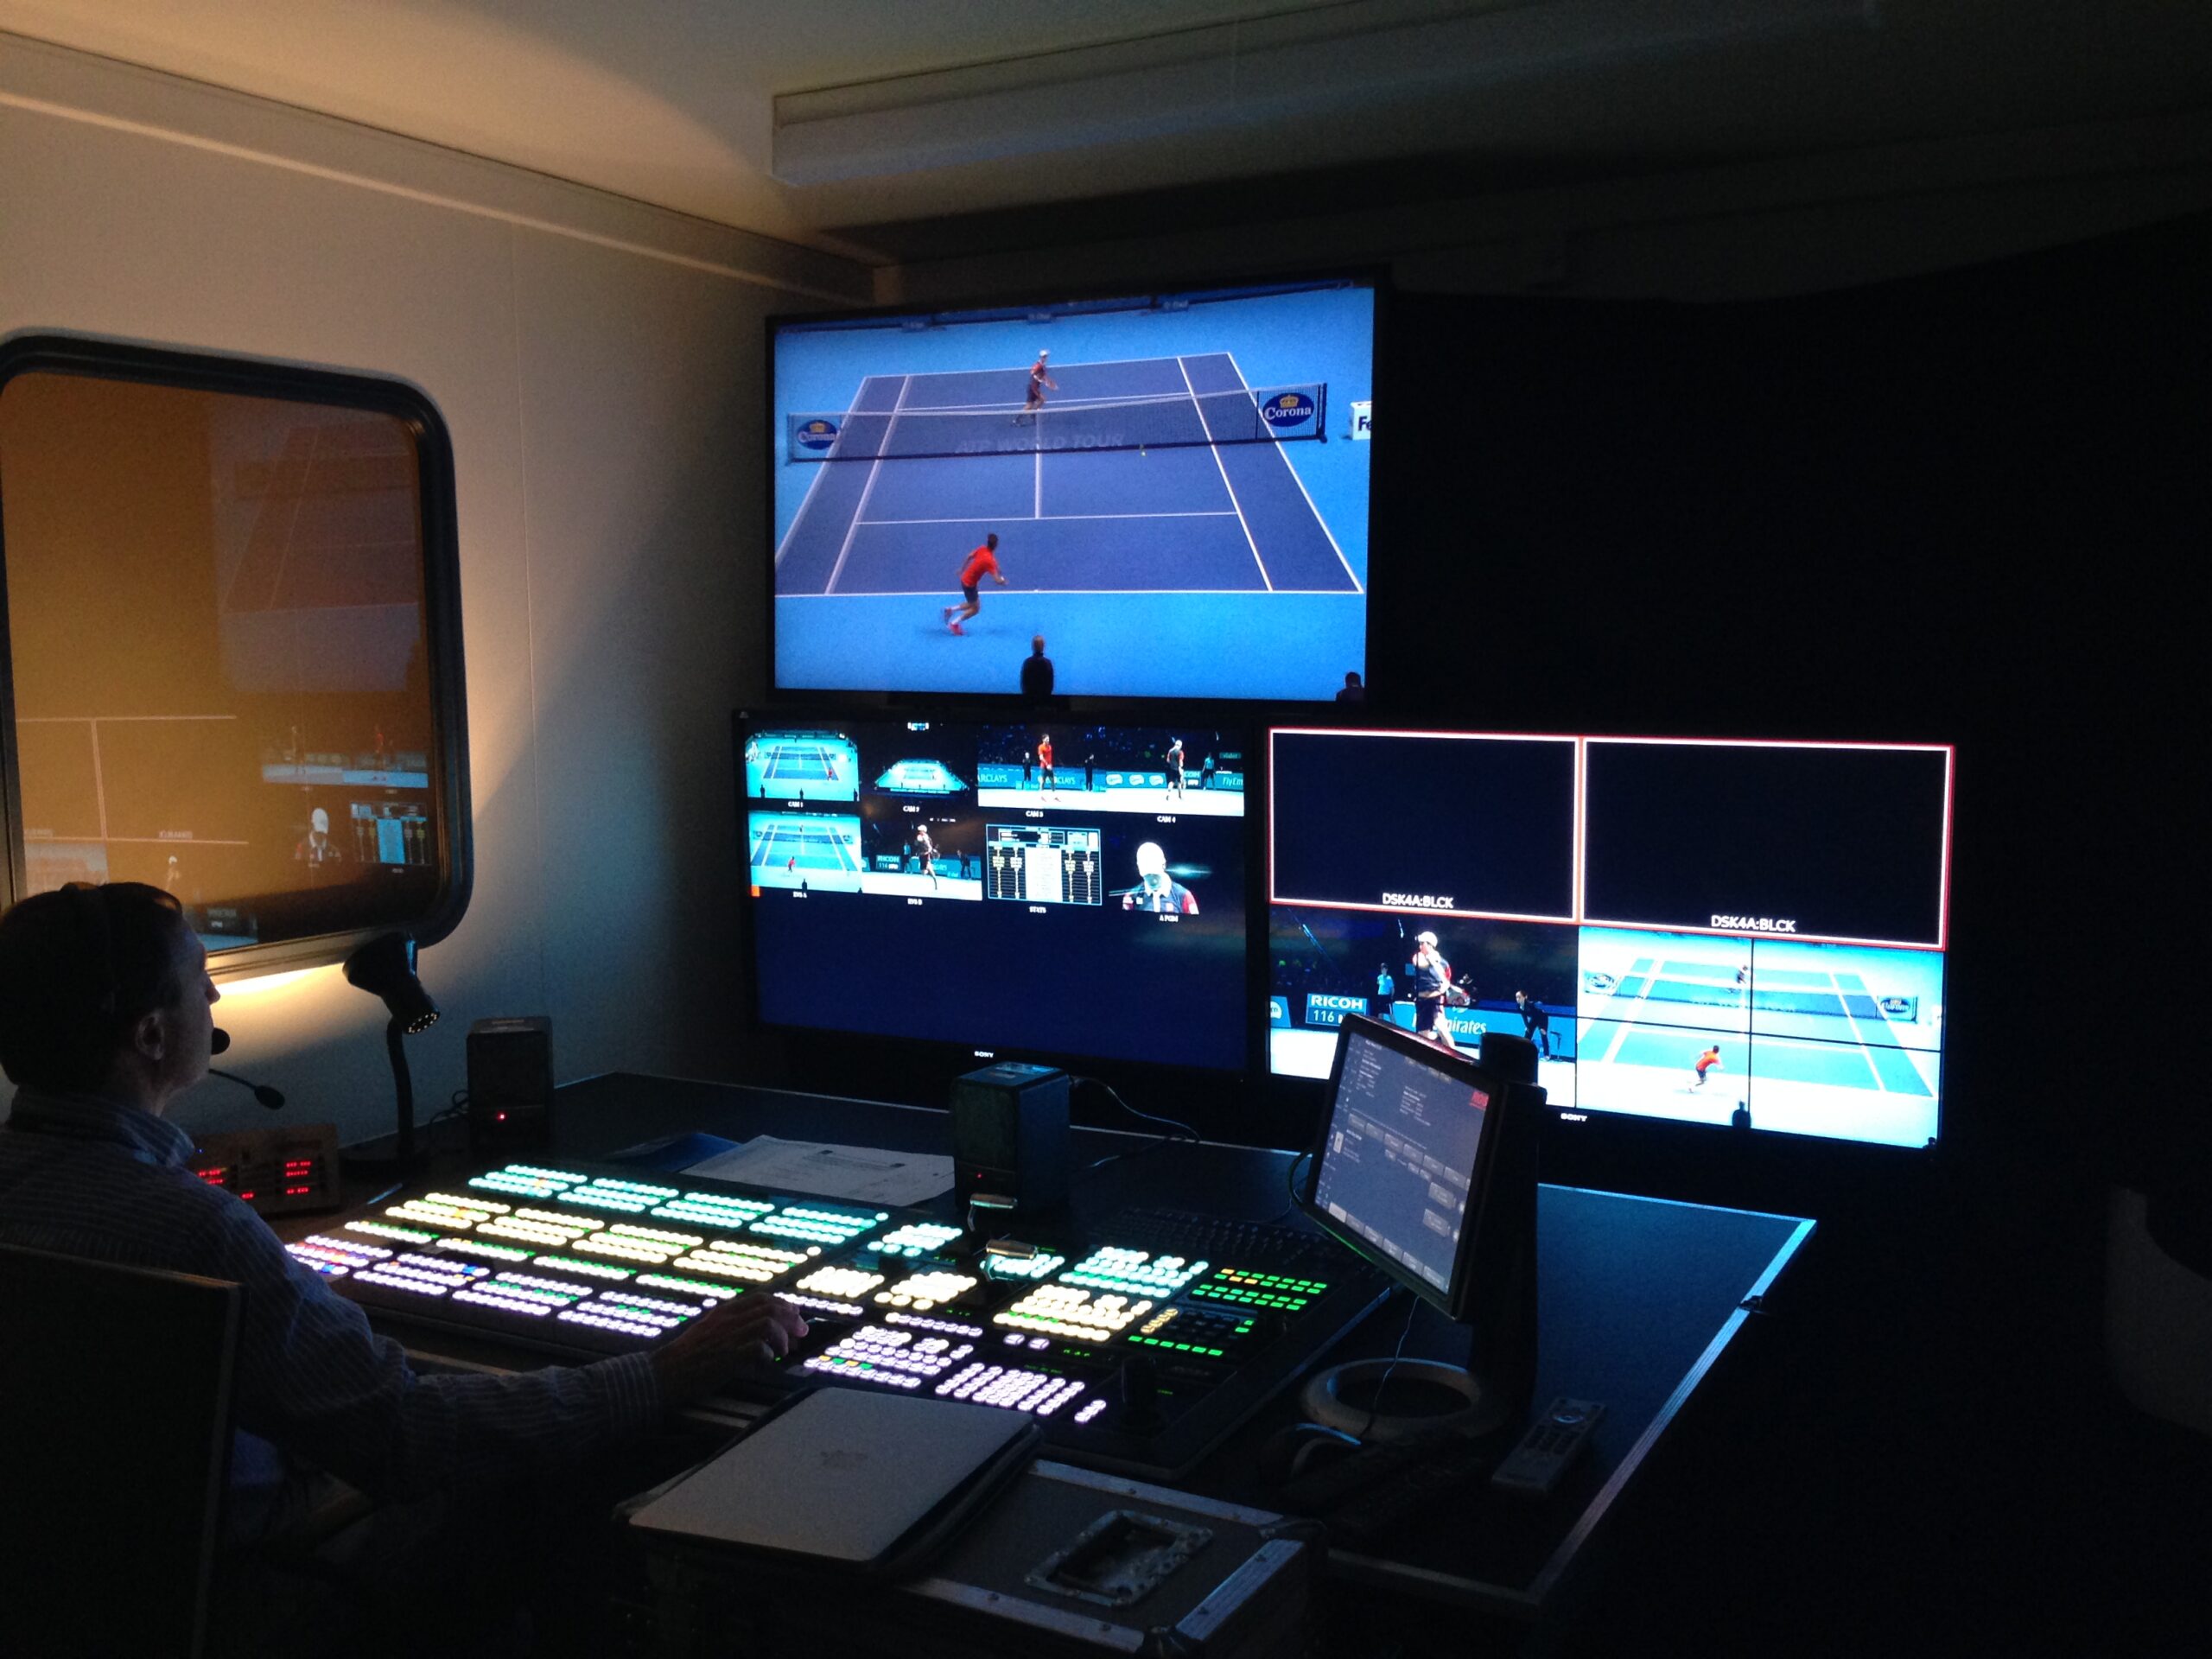 Ross Videos Acuity Proves its Ranking with Live 4K Tennis Production